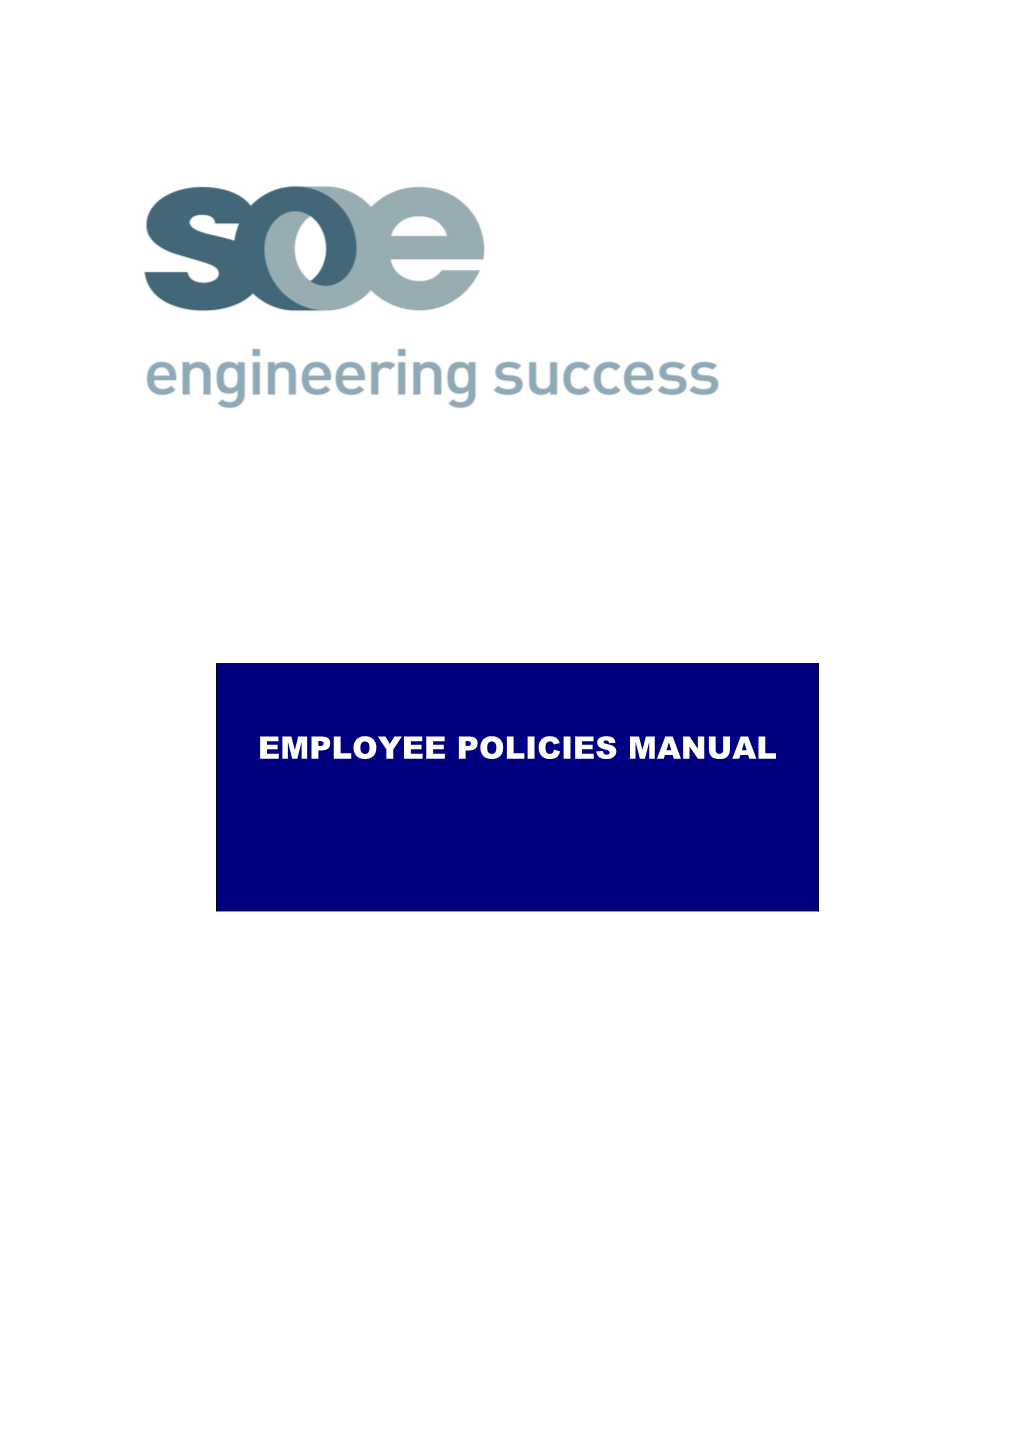 The Society Recognises and Values the Diversity of Employees and the Operations Engineering